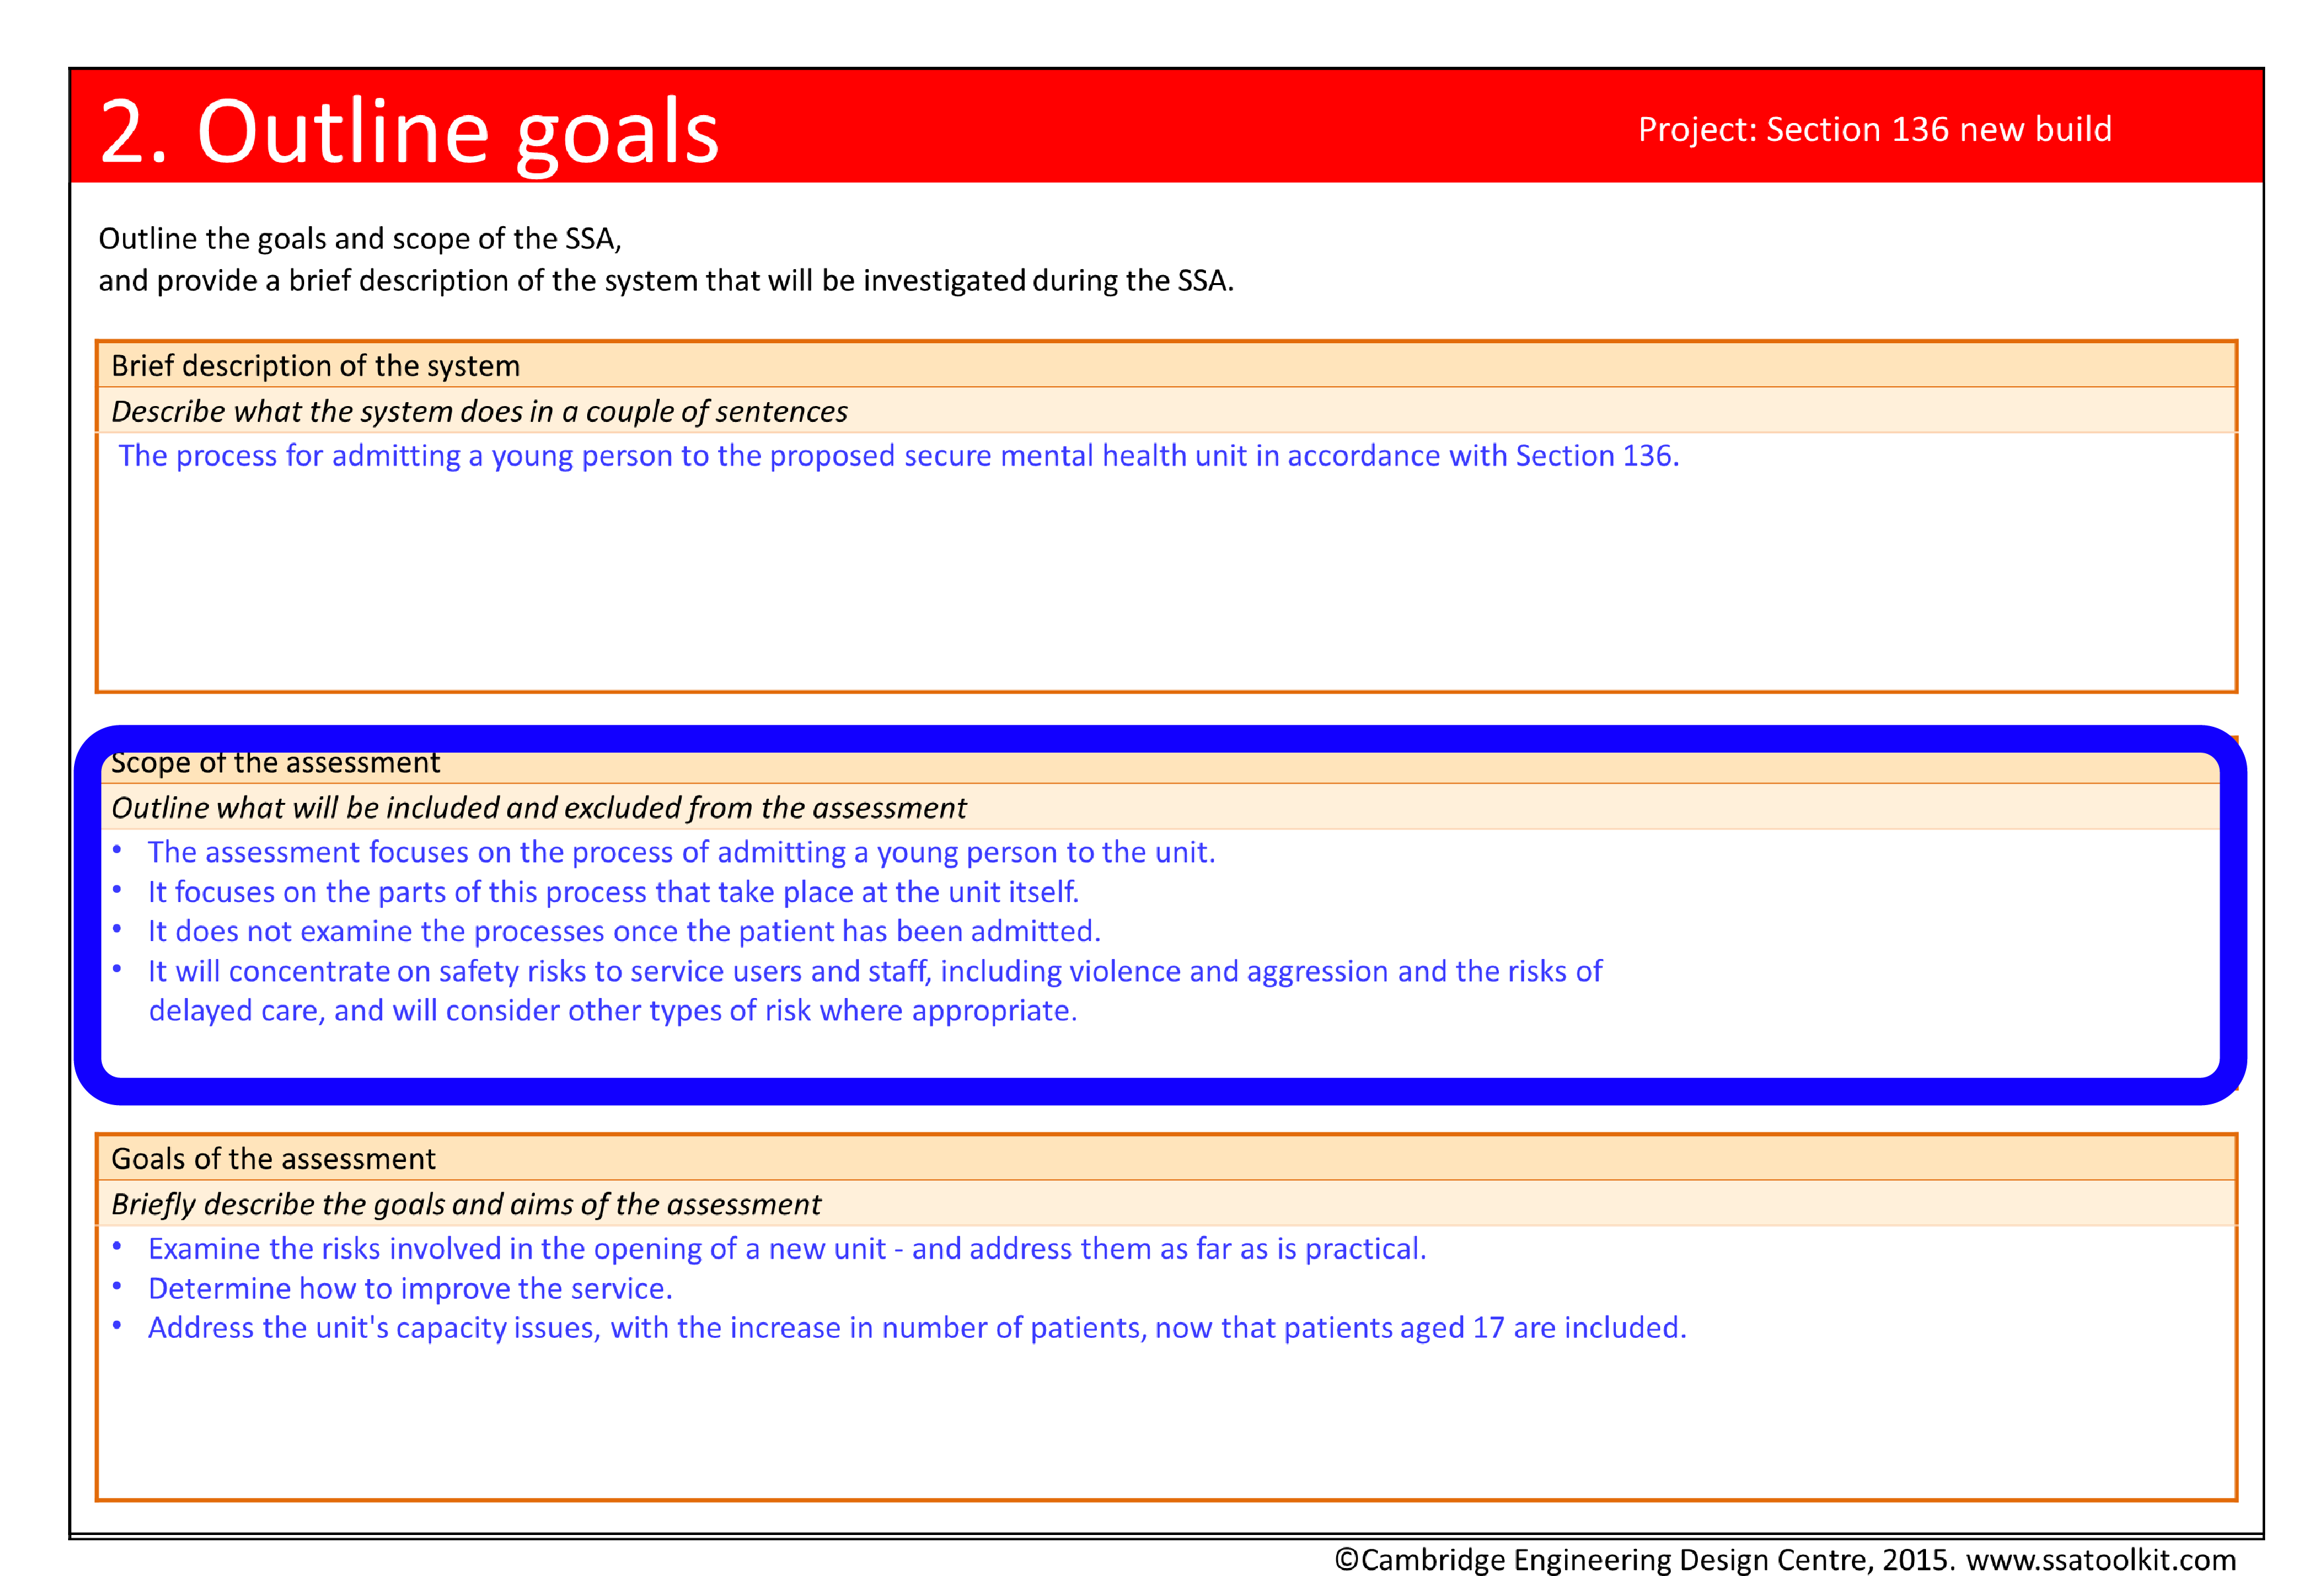 Screenshot of the Outline goals page from the Section 136 case study. The section on Scope is circled. It says that the assessment focuses on the process of admitting a young person to the unit. It focuses on the parts of this process that take place at the unit itself. It does not examine the processes once the patient has been admitted. It will concentrate on safety risks to service users and staff, including violence and agression and the risks of delayed care, and will confiser other types of risk where appropriate. The full form in pdf is available from the Resources page.